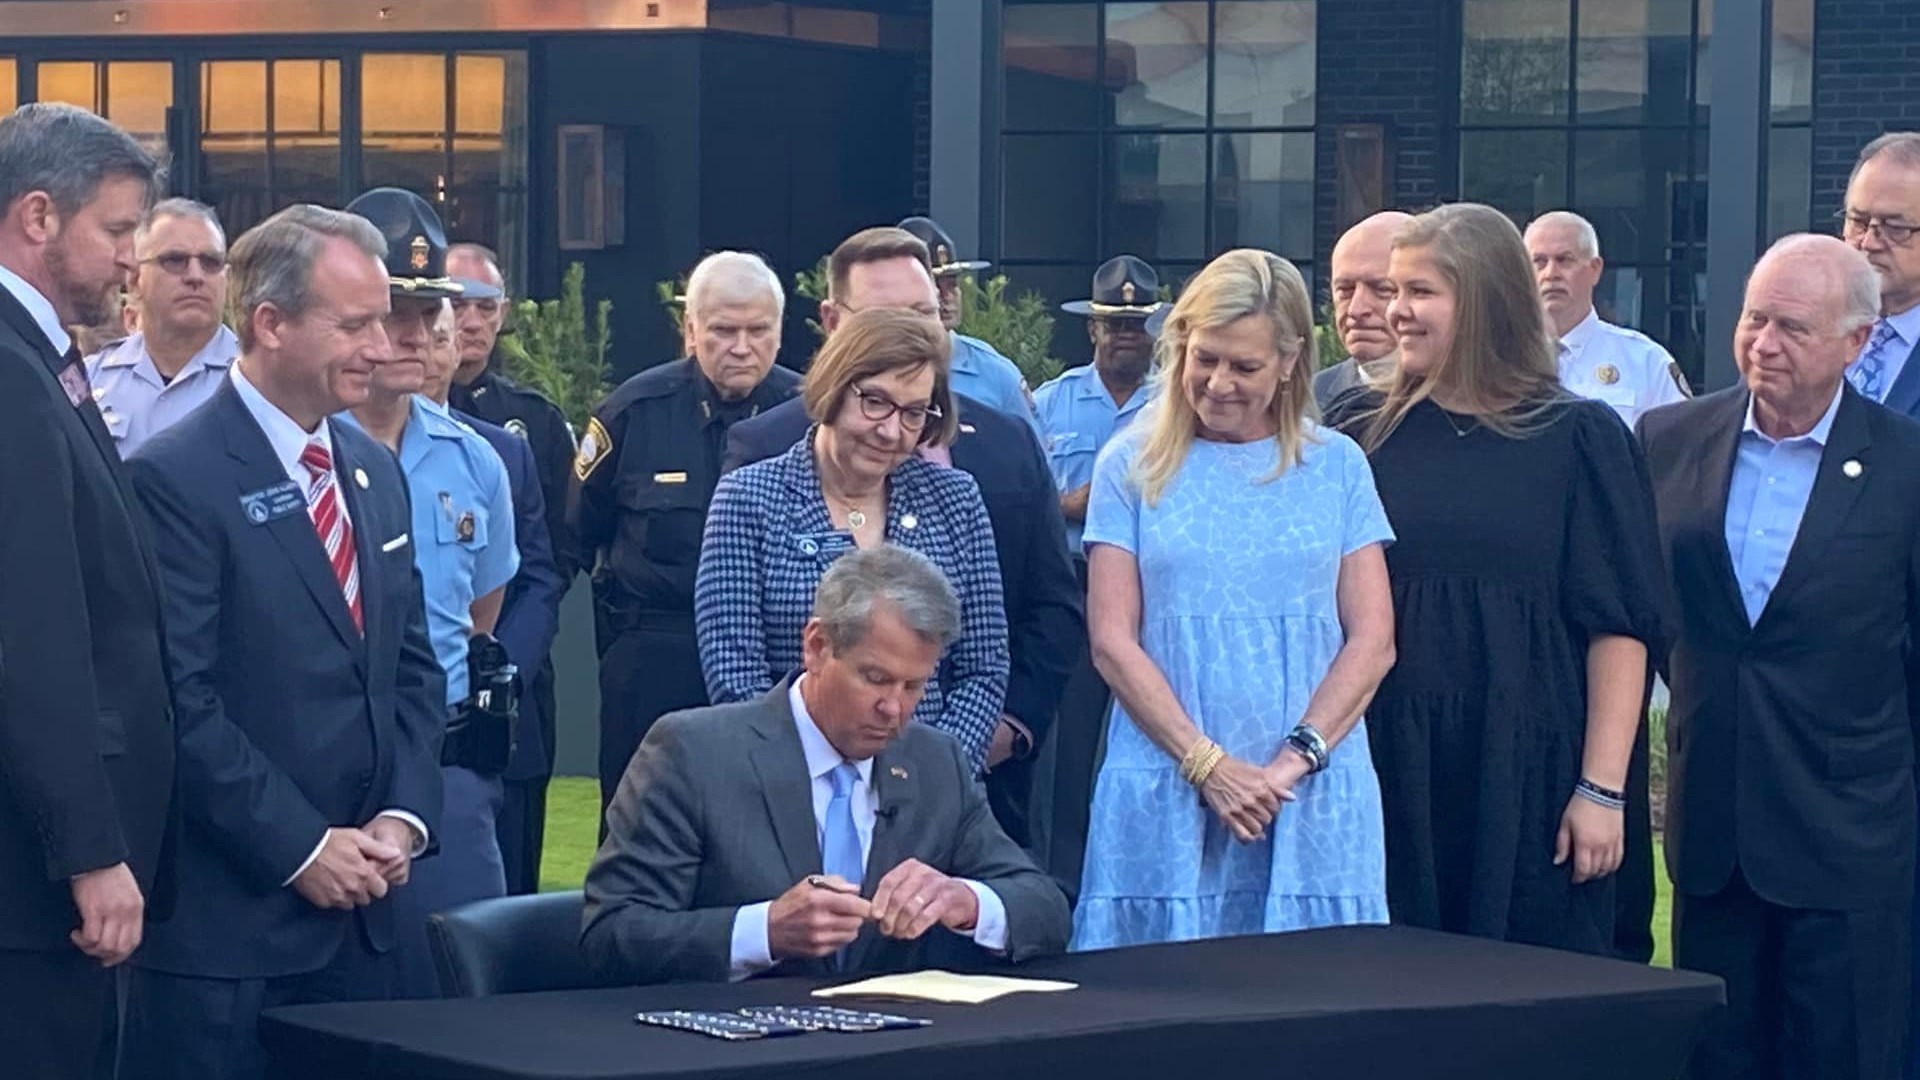 Georgia Governor Brian Kemp signed seven new bills into law on Monday surrounded by dozens of law enforcement officials.